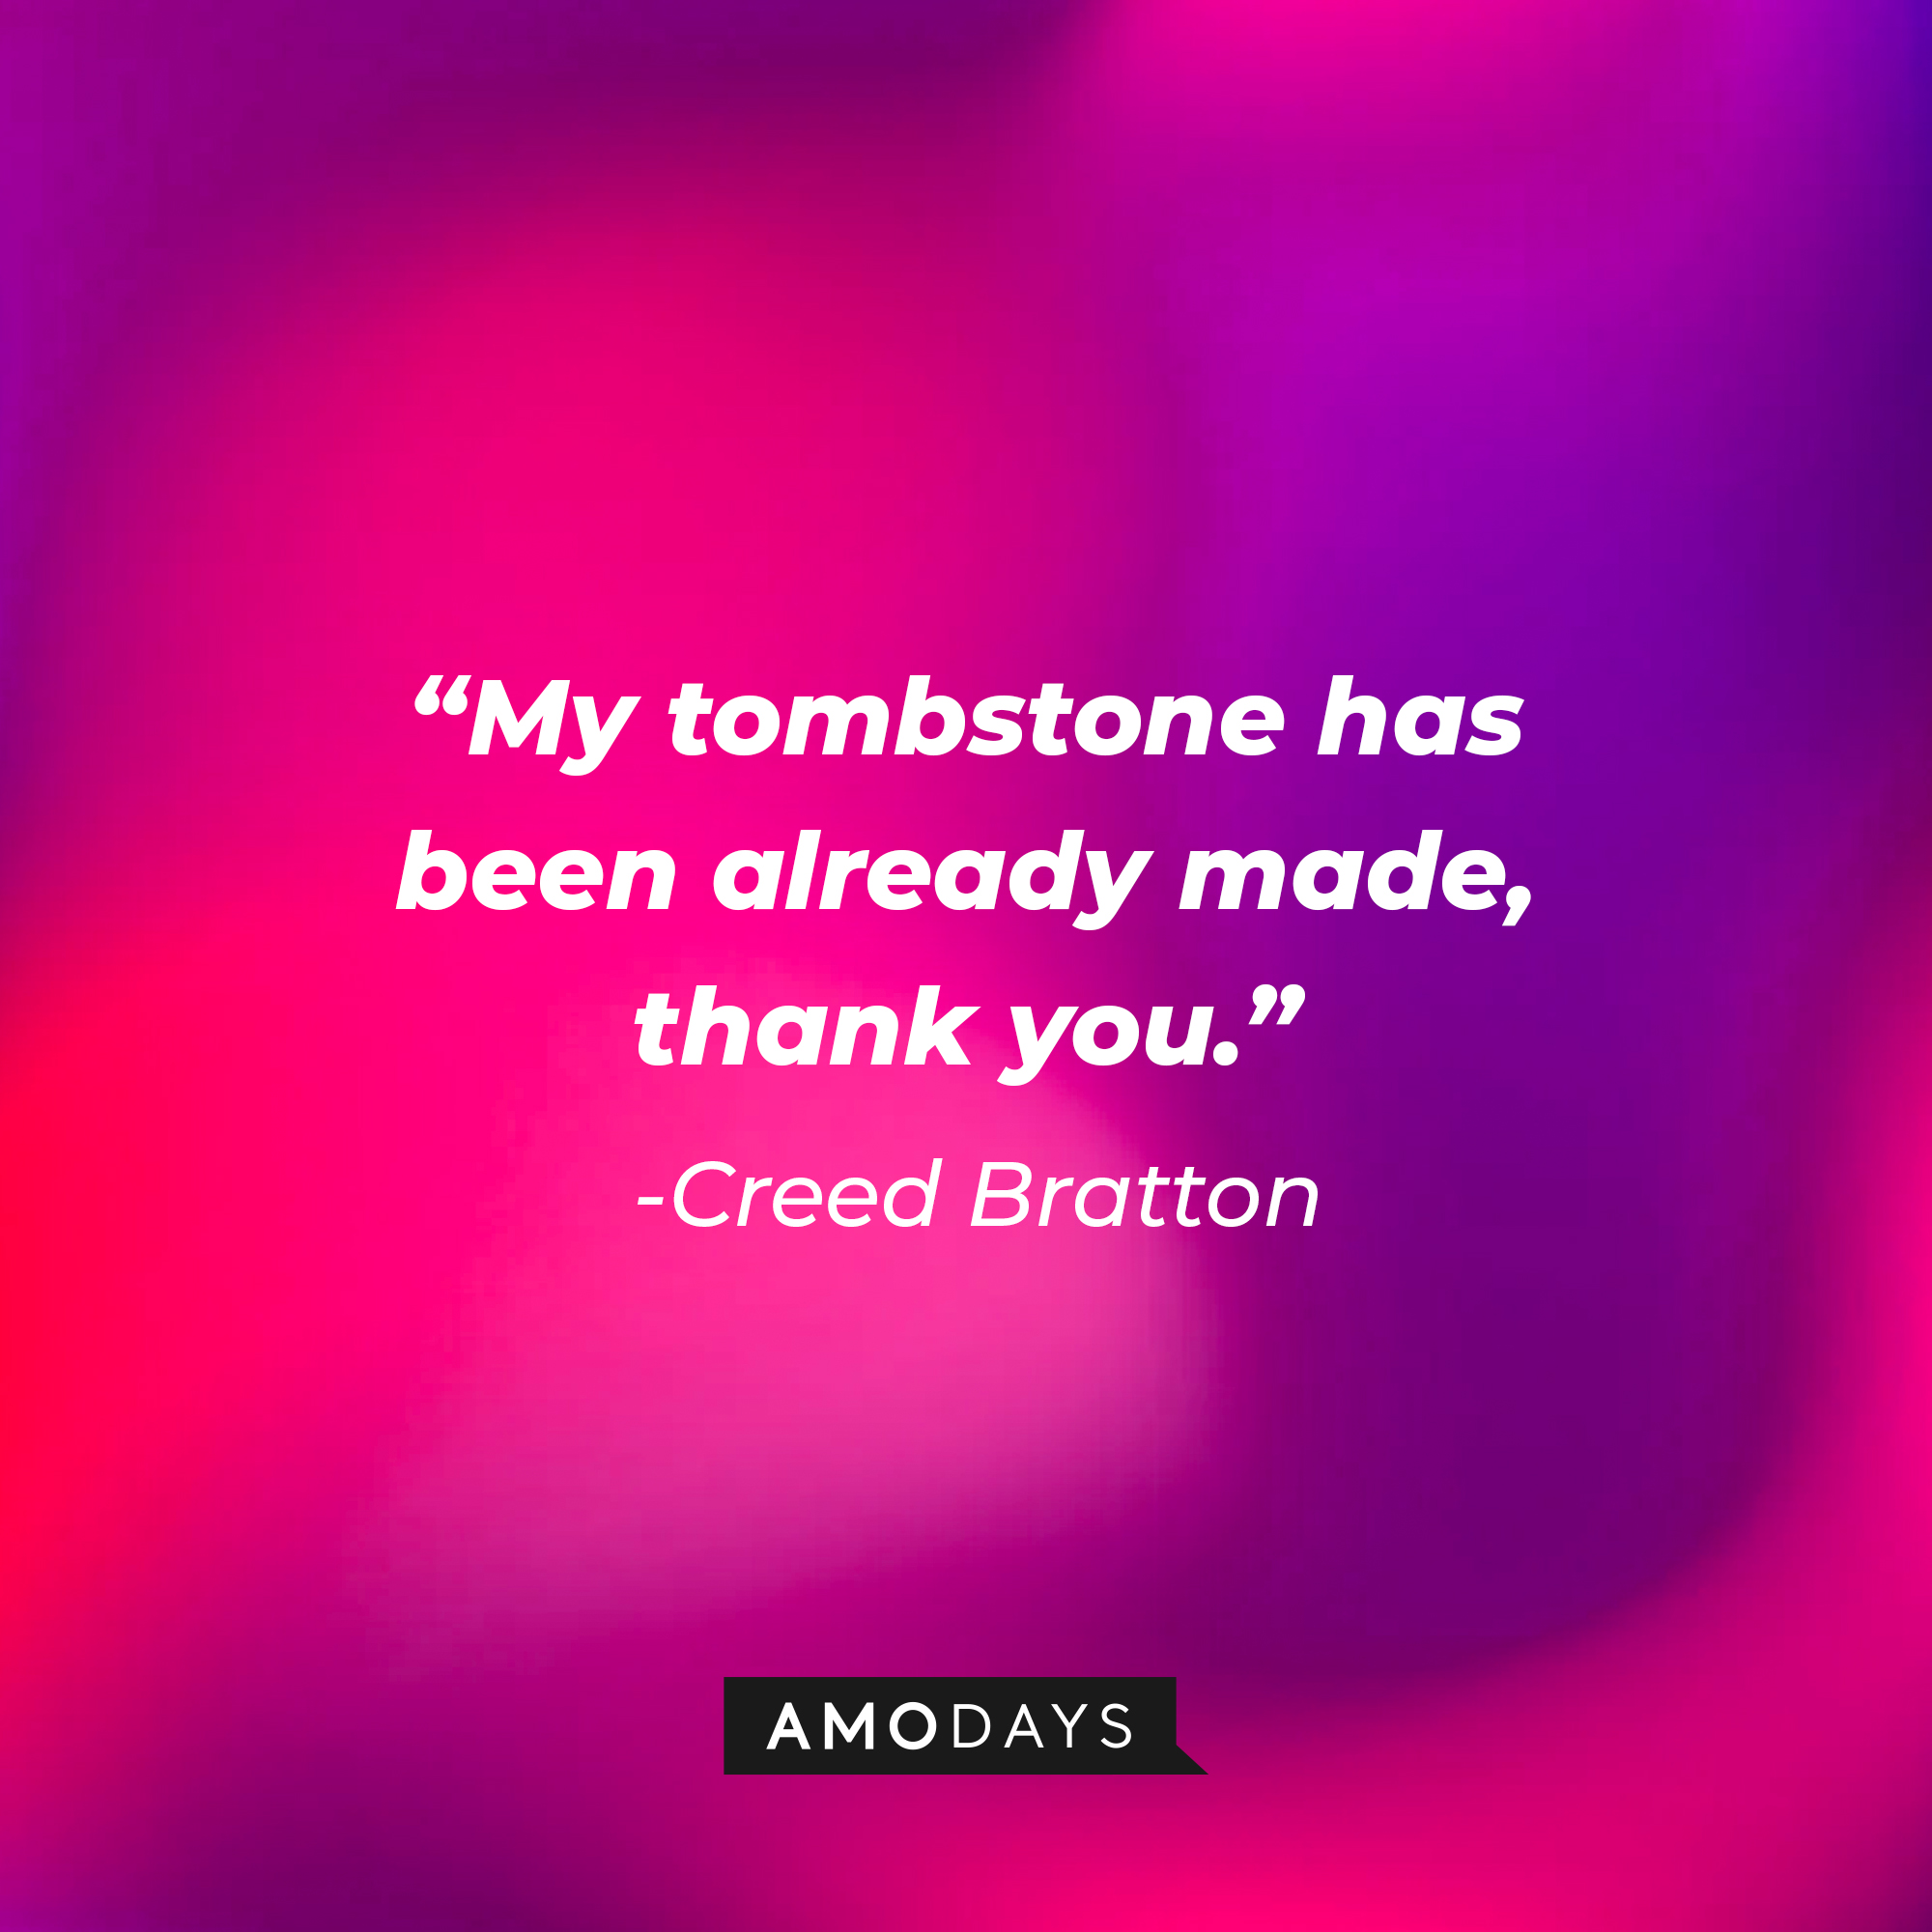 Creed Bratton's quote: "My tombstone has been already made, thank you." | Source: Amodays